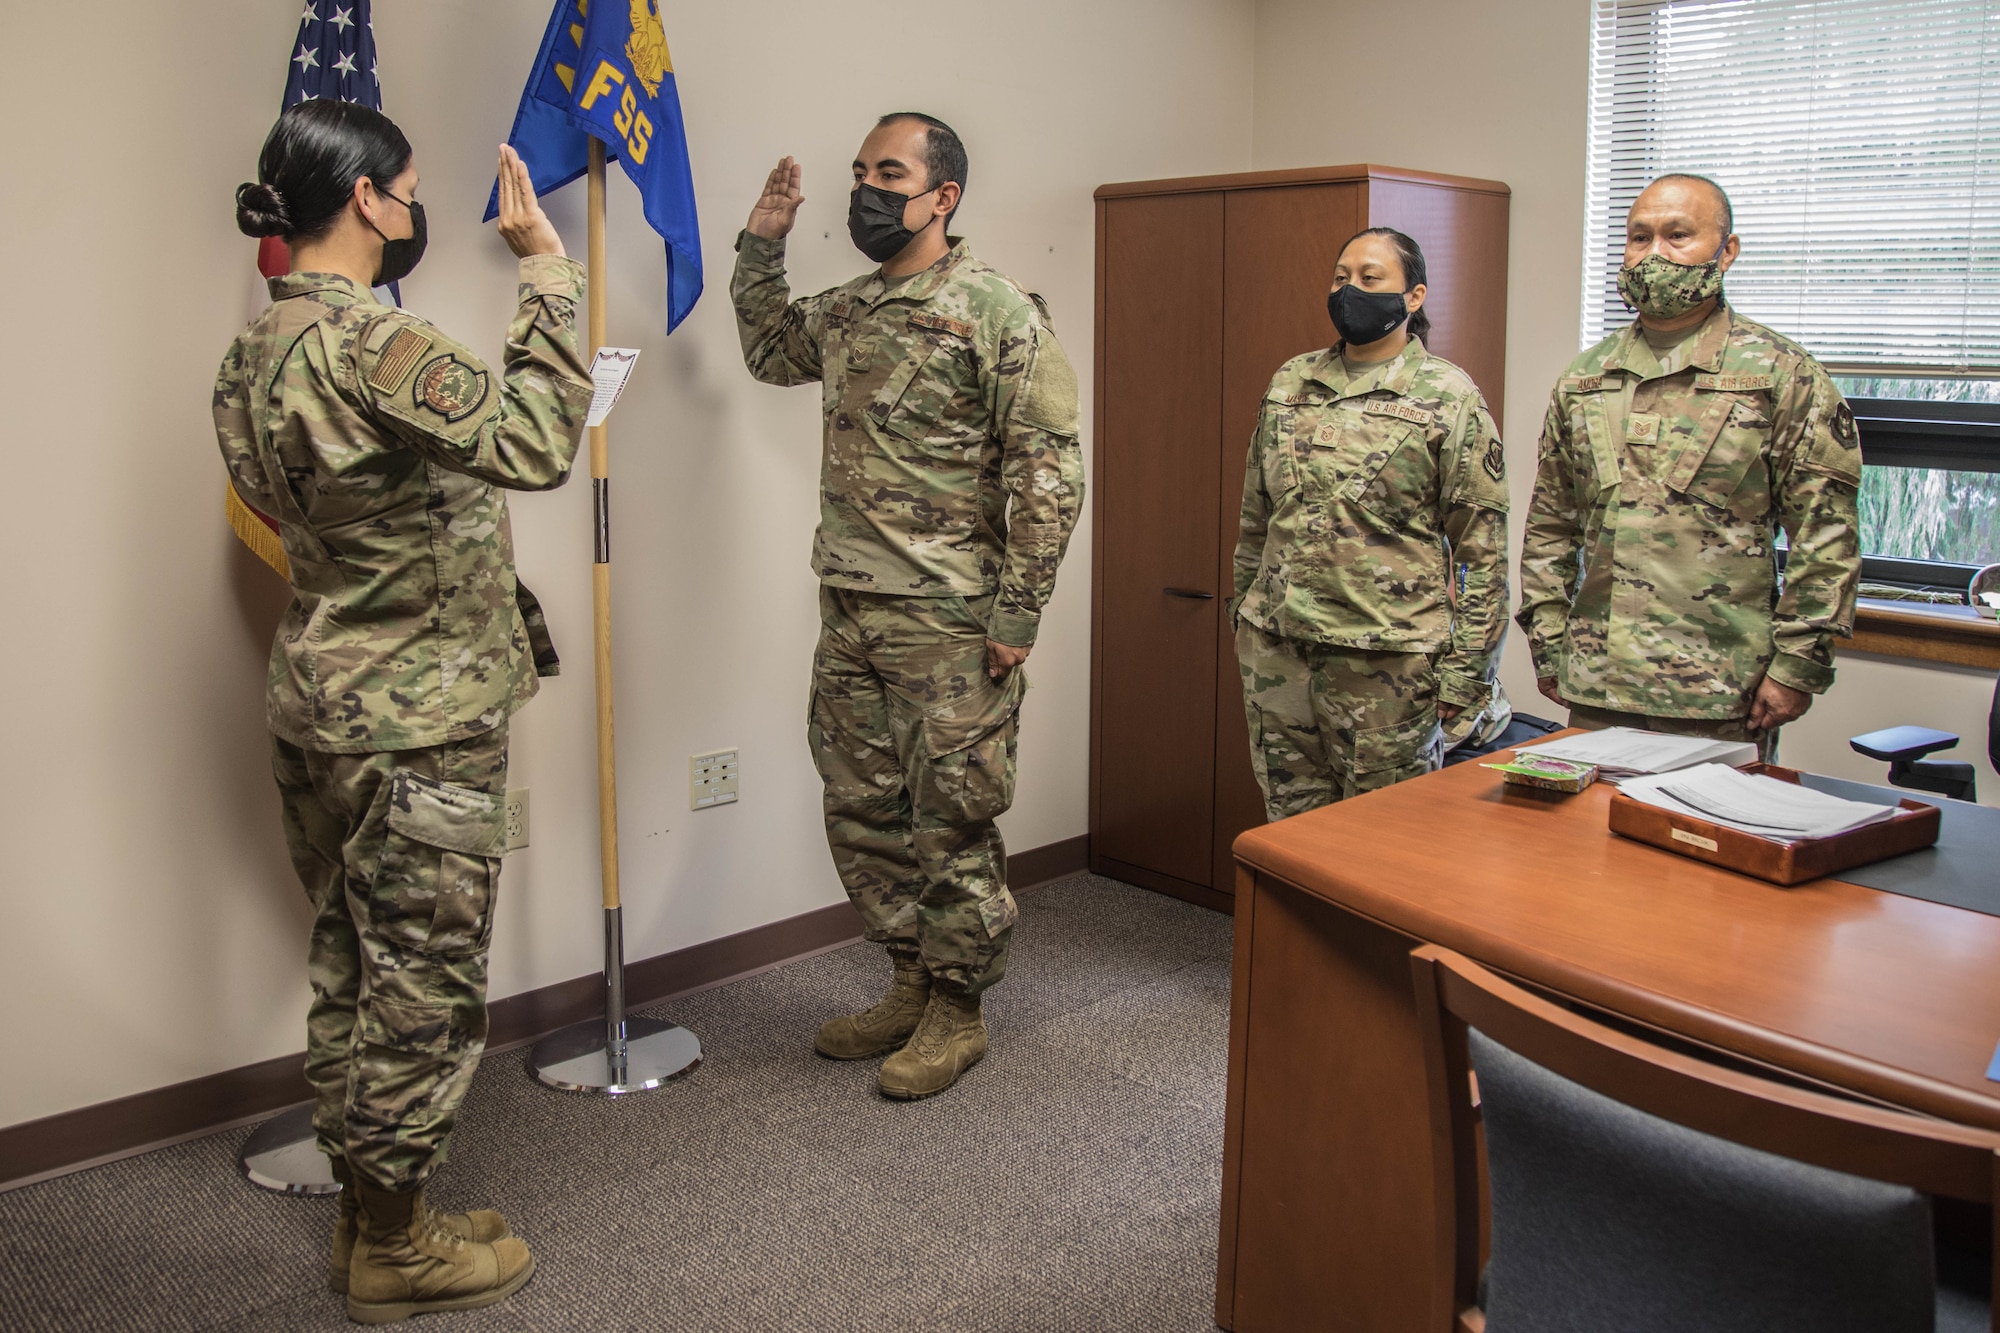 Airman raised his right hand to take the oath of enlistment.